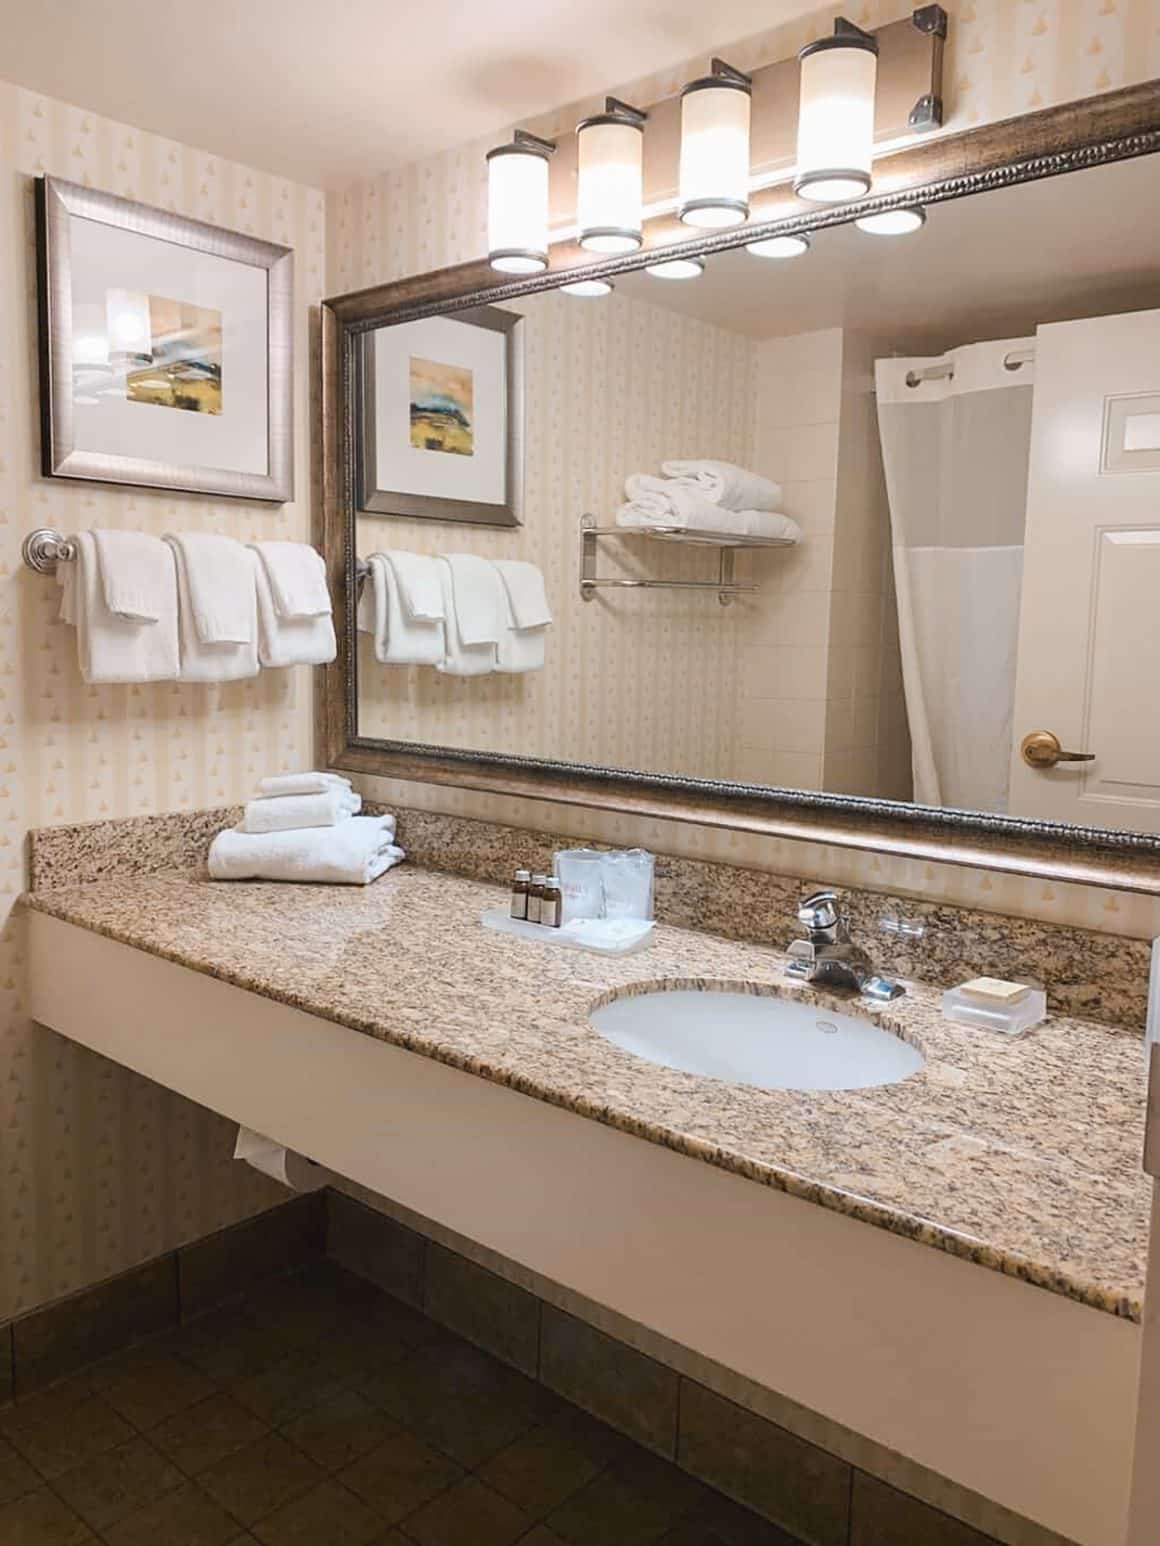 Bathrooms in hotel rooms at the Hershey Lodge in Hershey PA- photo credit Jenn Greene, travel expert and travel agent